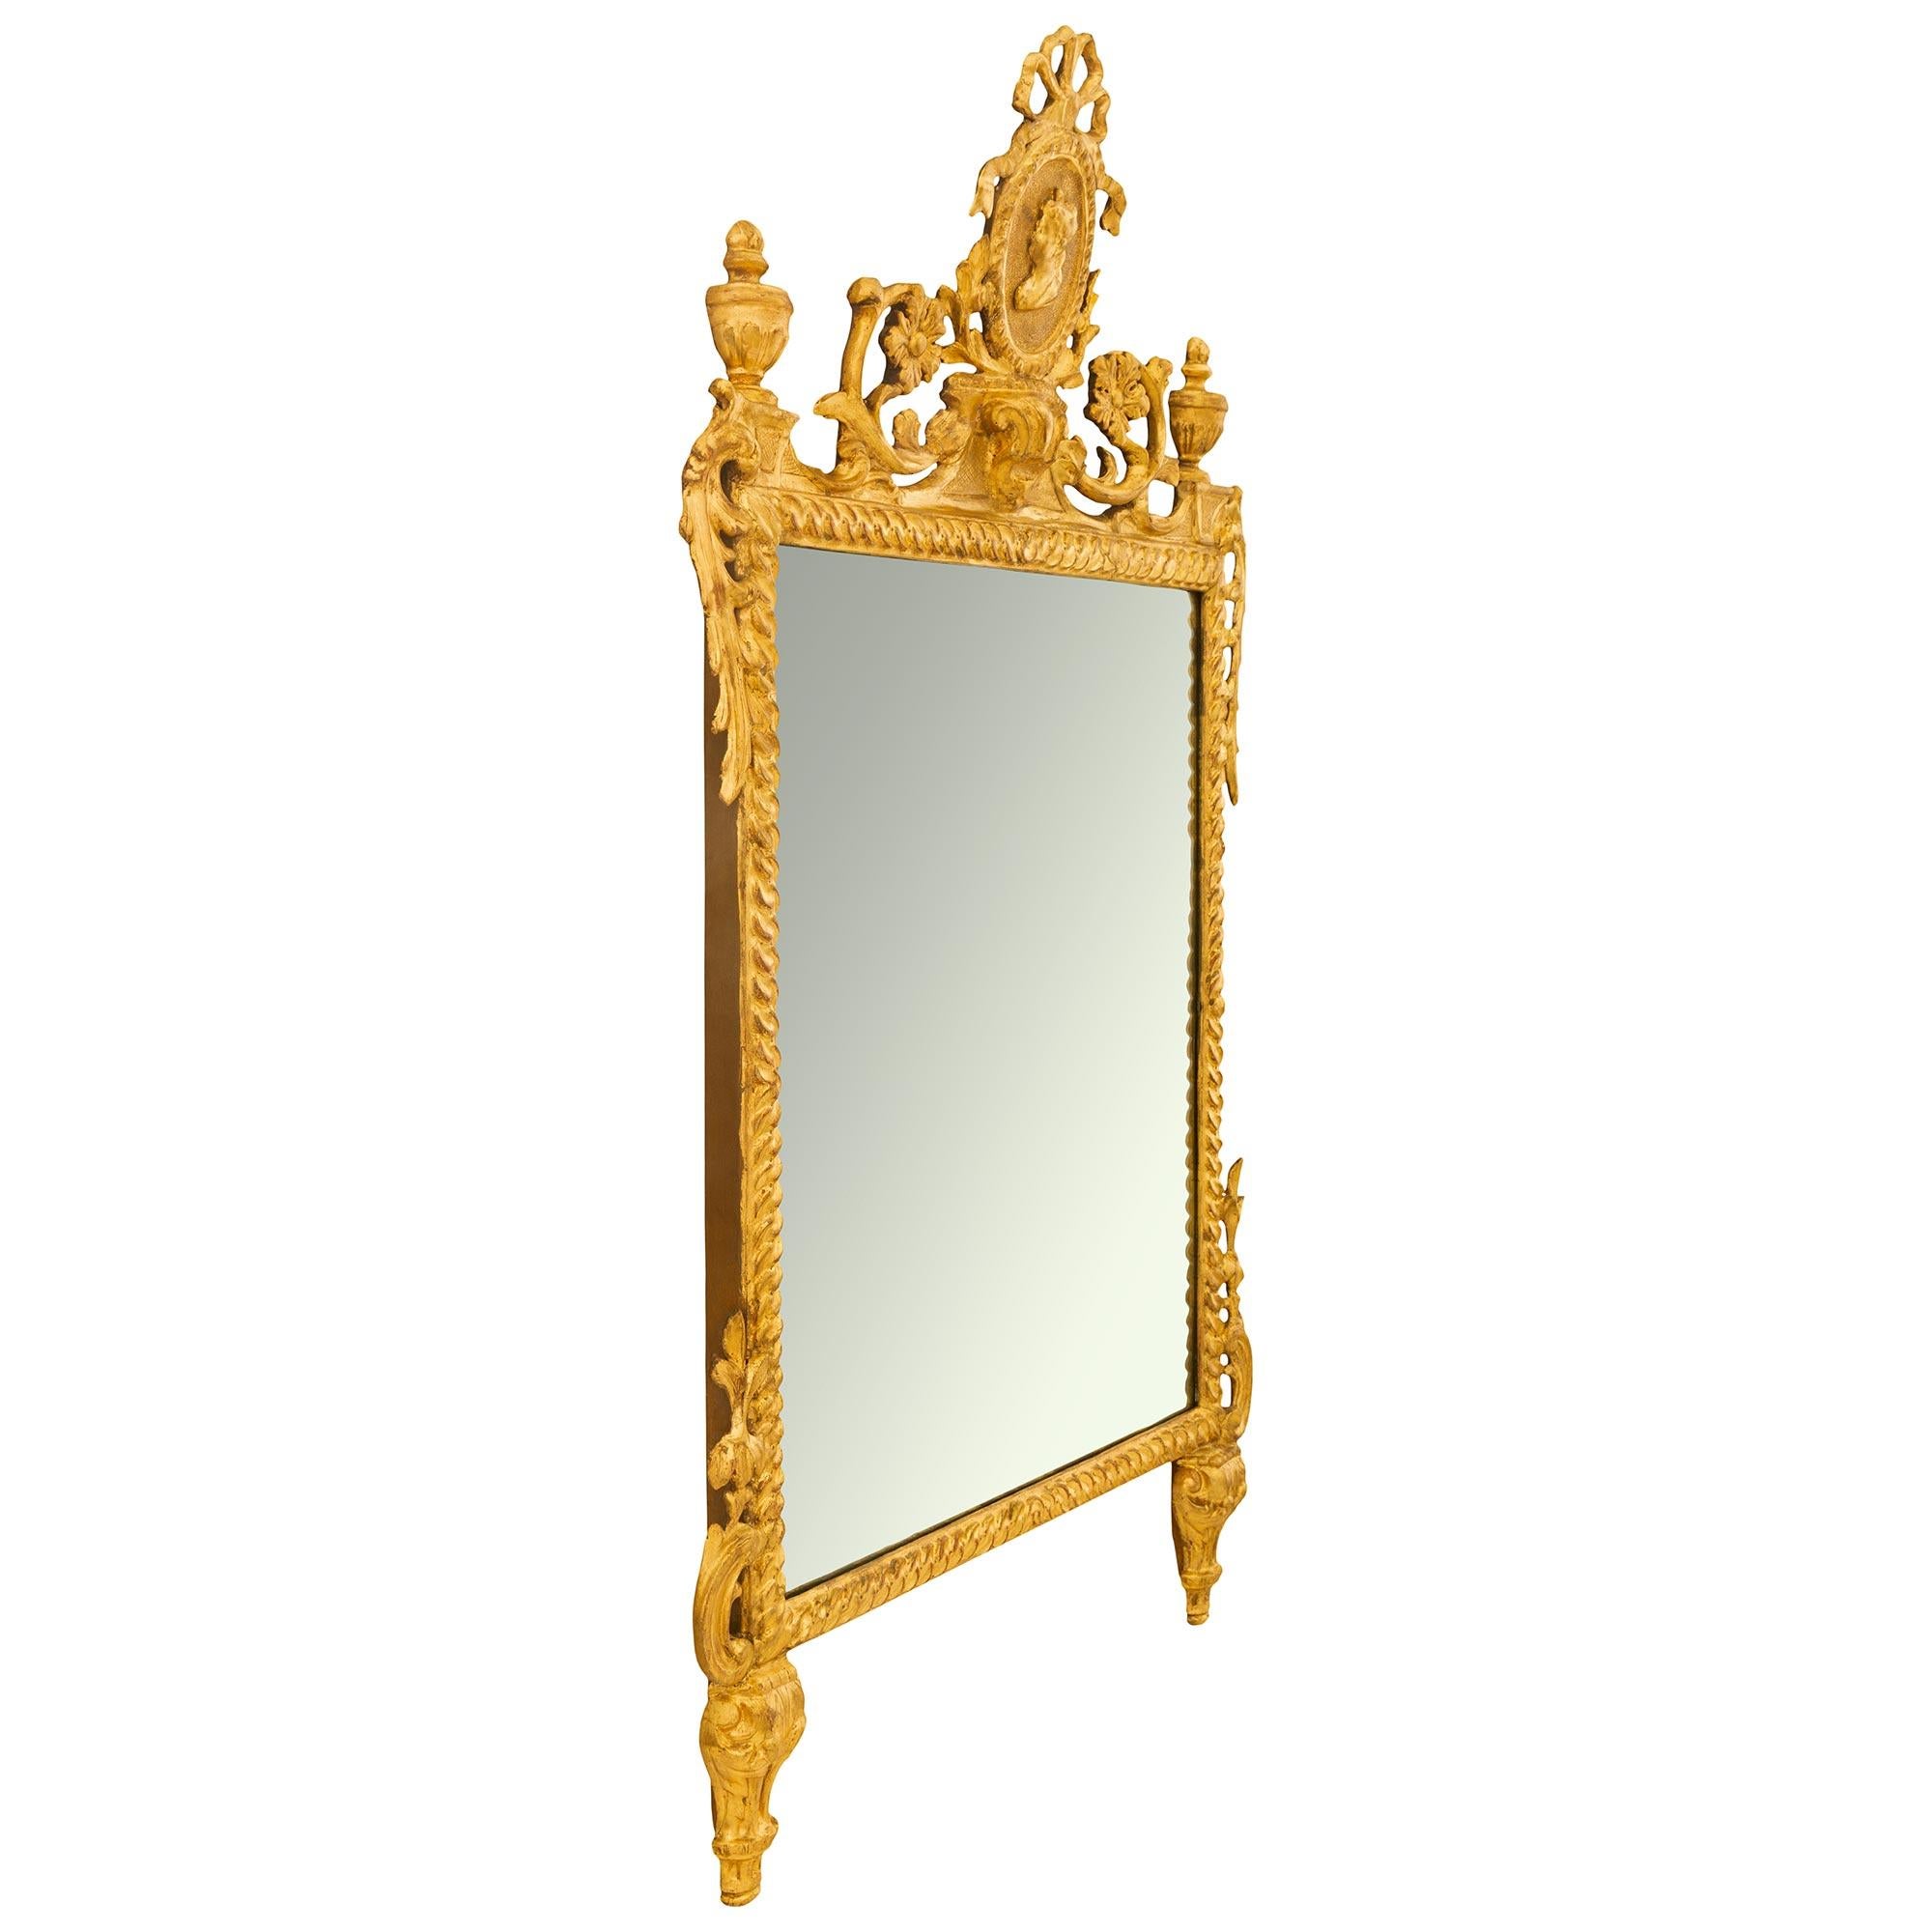 An elegant Italian 18th century Louis XVI period Giltwood mirror. The mirror with all of its original mirror plate and gilding is raised by two supports with acanthus leaves. The rectangular frame with a wavelike design has an ’S’ scrolled acanthus